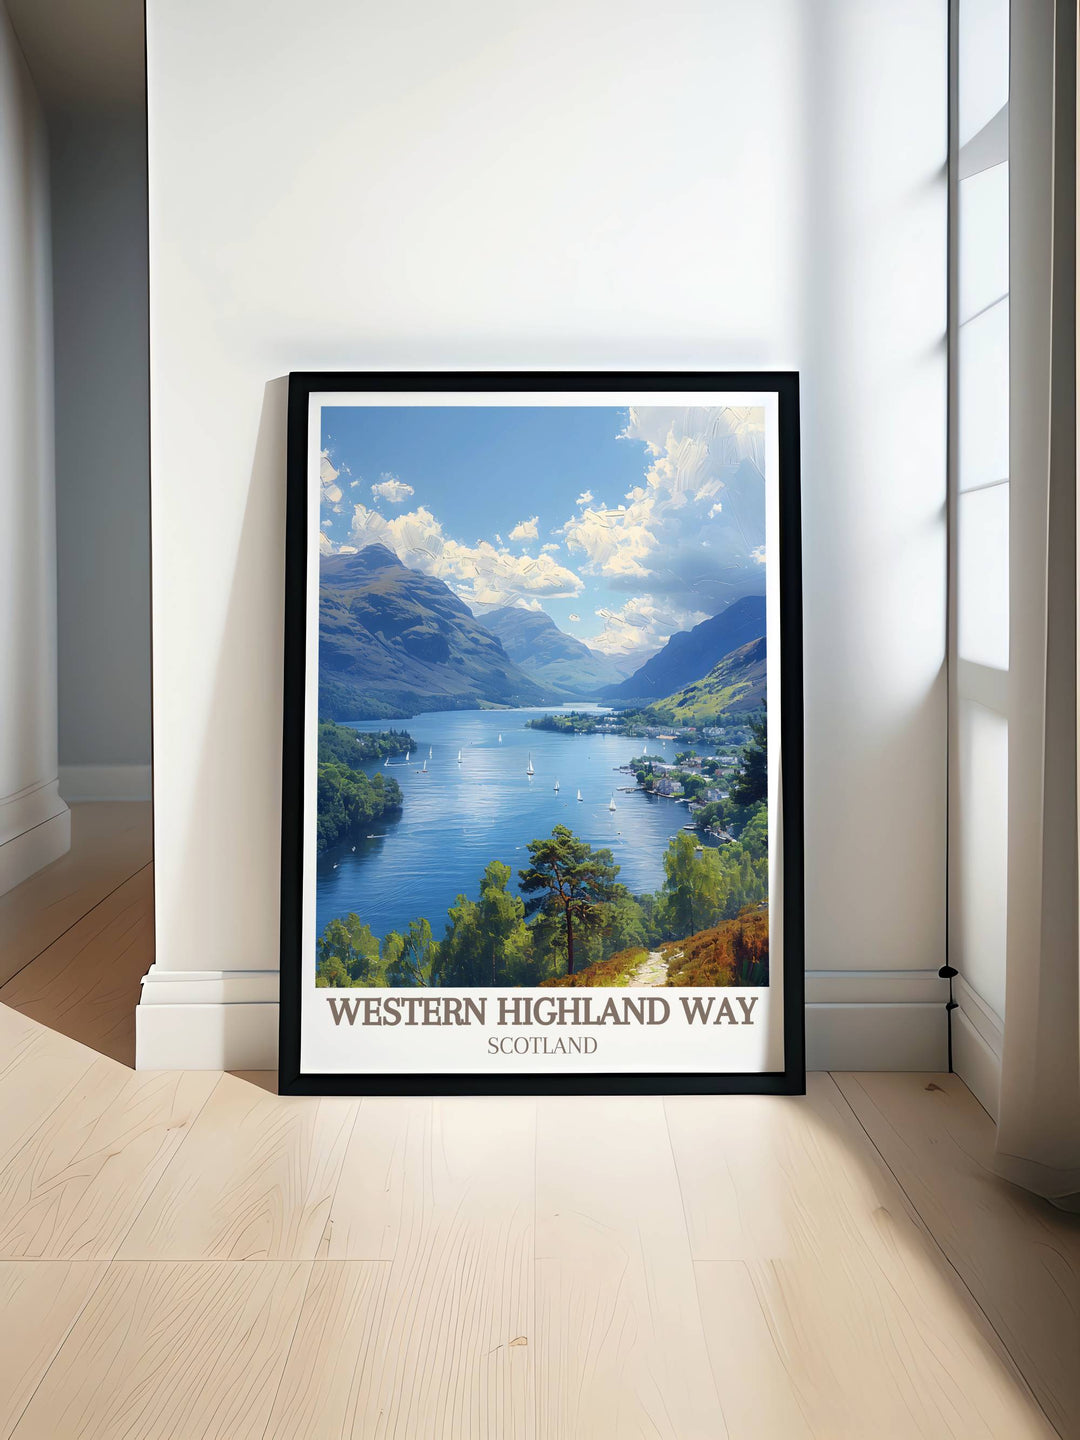 Scenic view of Loch Lomond with the West Highland Way, capturing the serene beauty of Scotlands largest freshwater loch in a stunning modern wall decor piece.